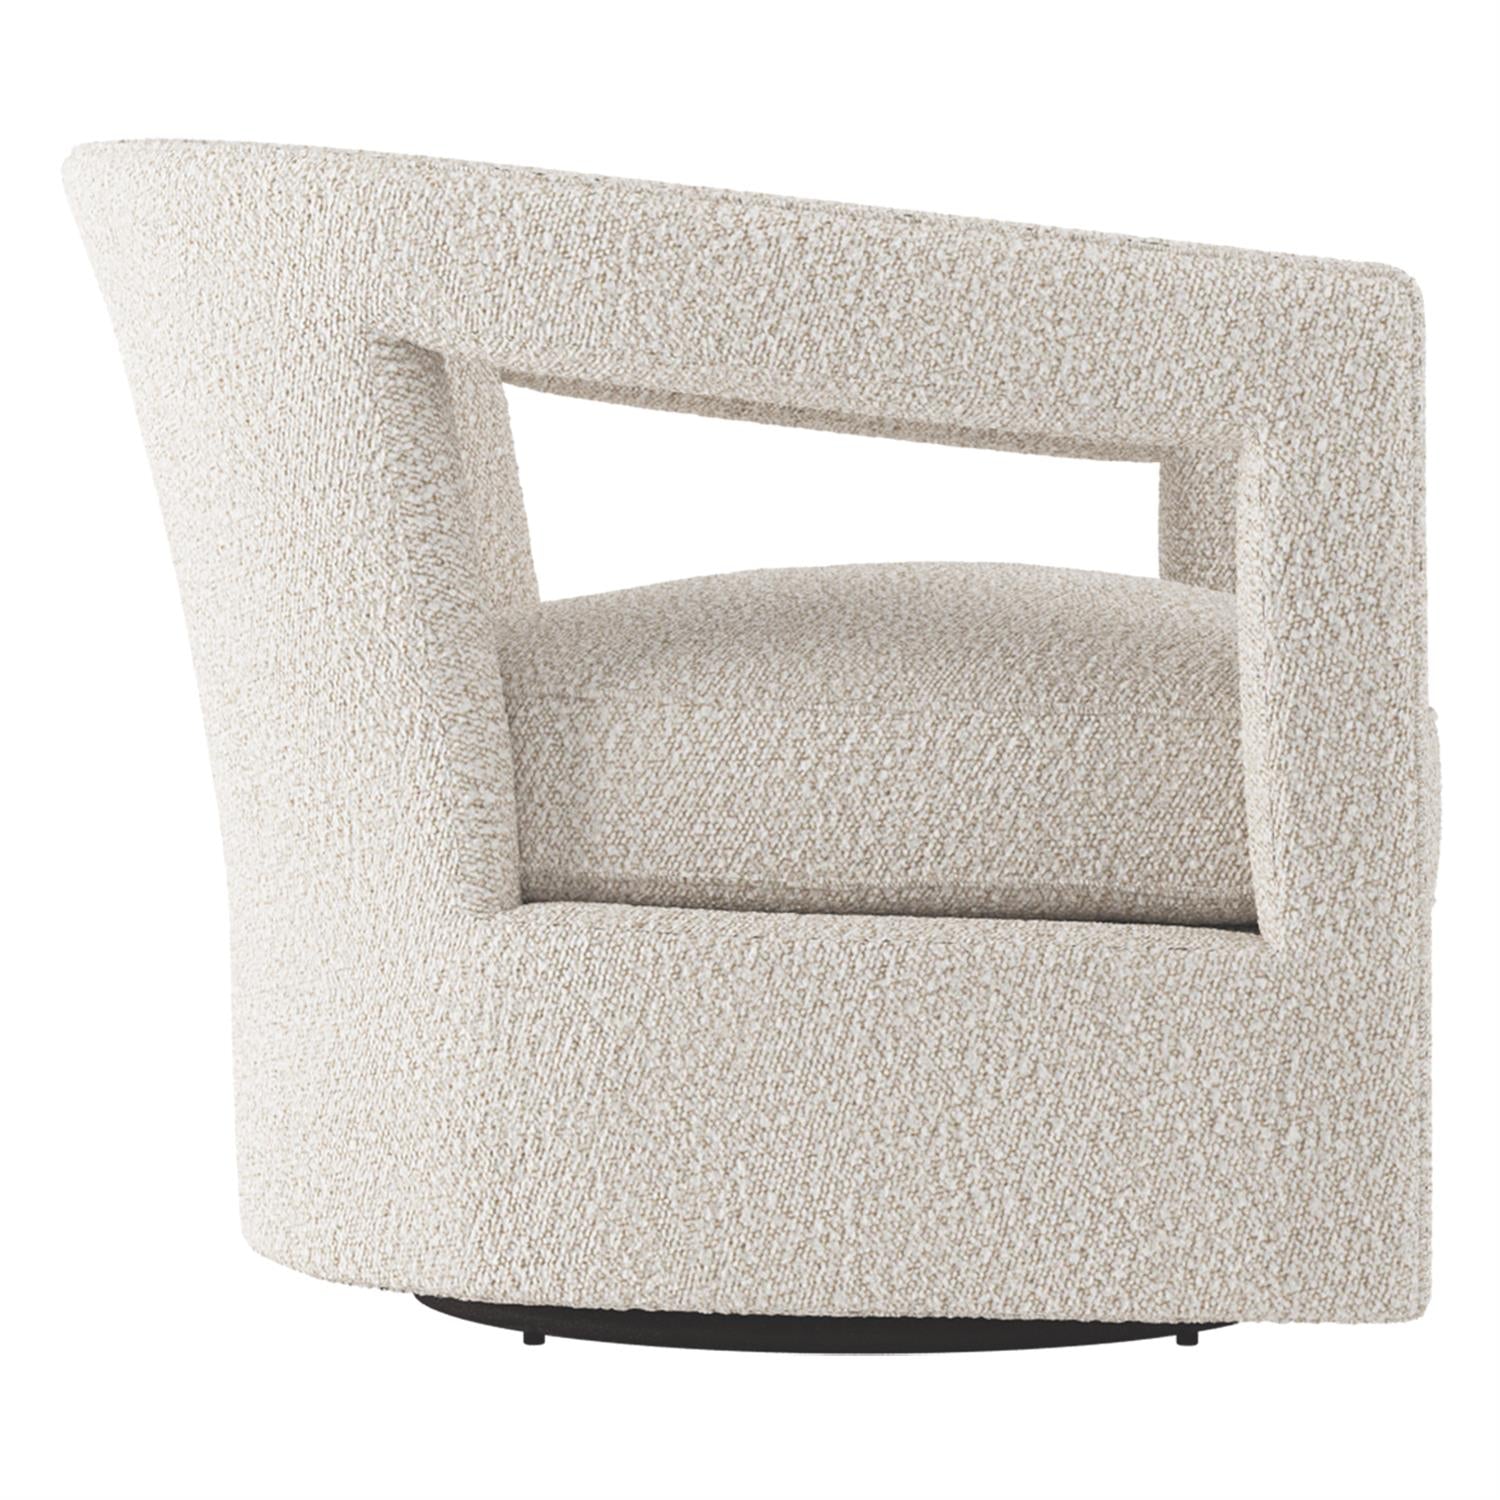 Bernhardt, Alana Fabric Swivel Chair Without Nails